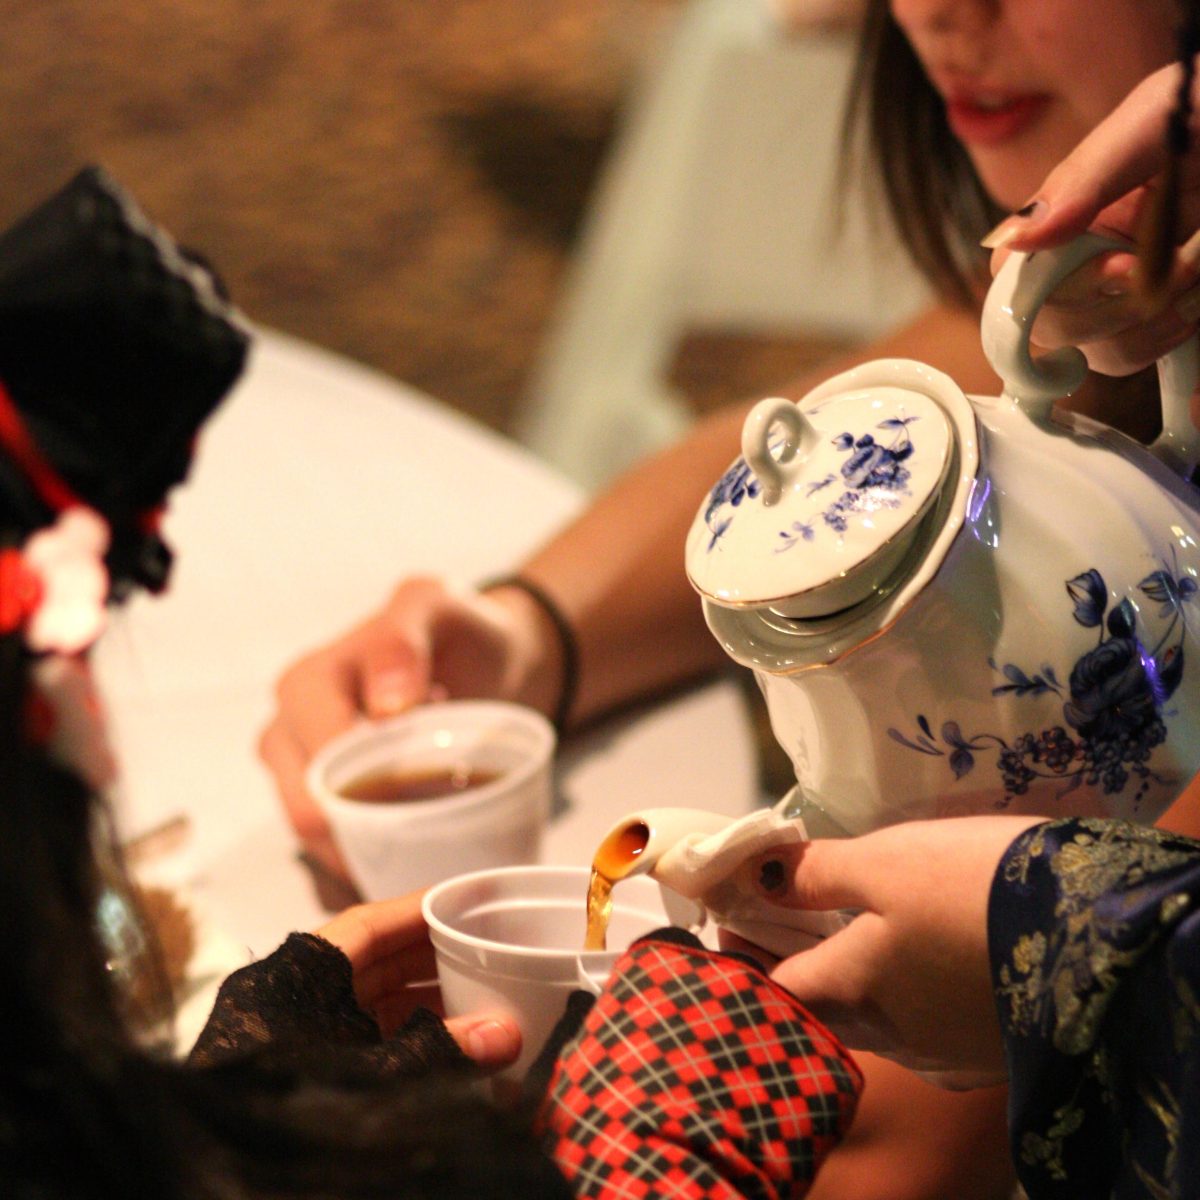 Tea Party by kevin dooley is licensed under CC BY 2.0.